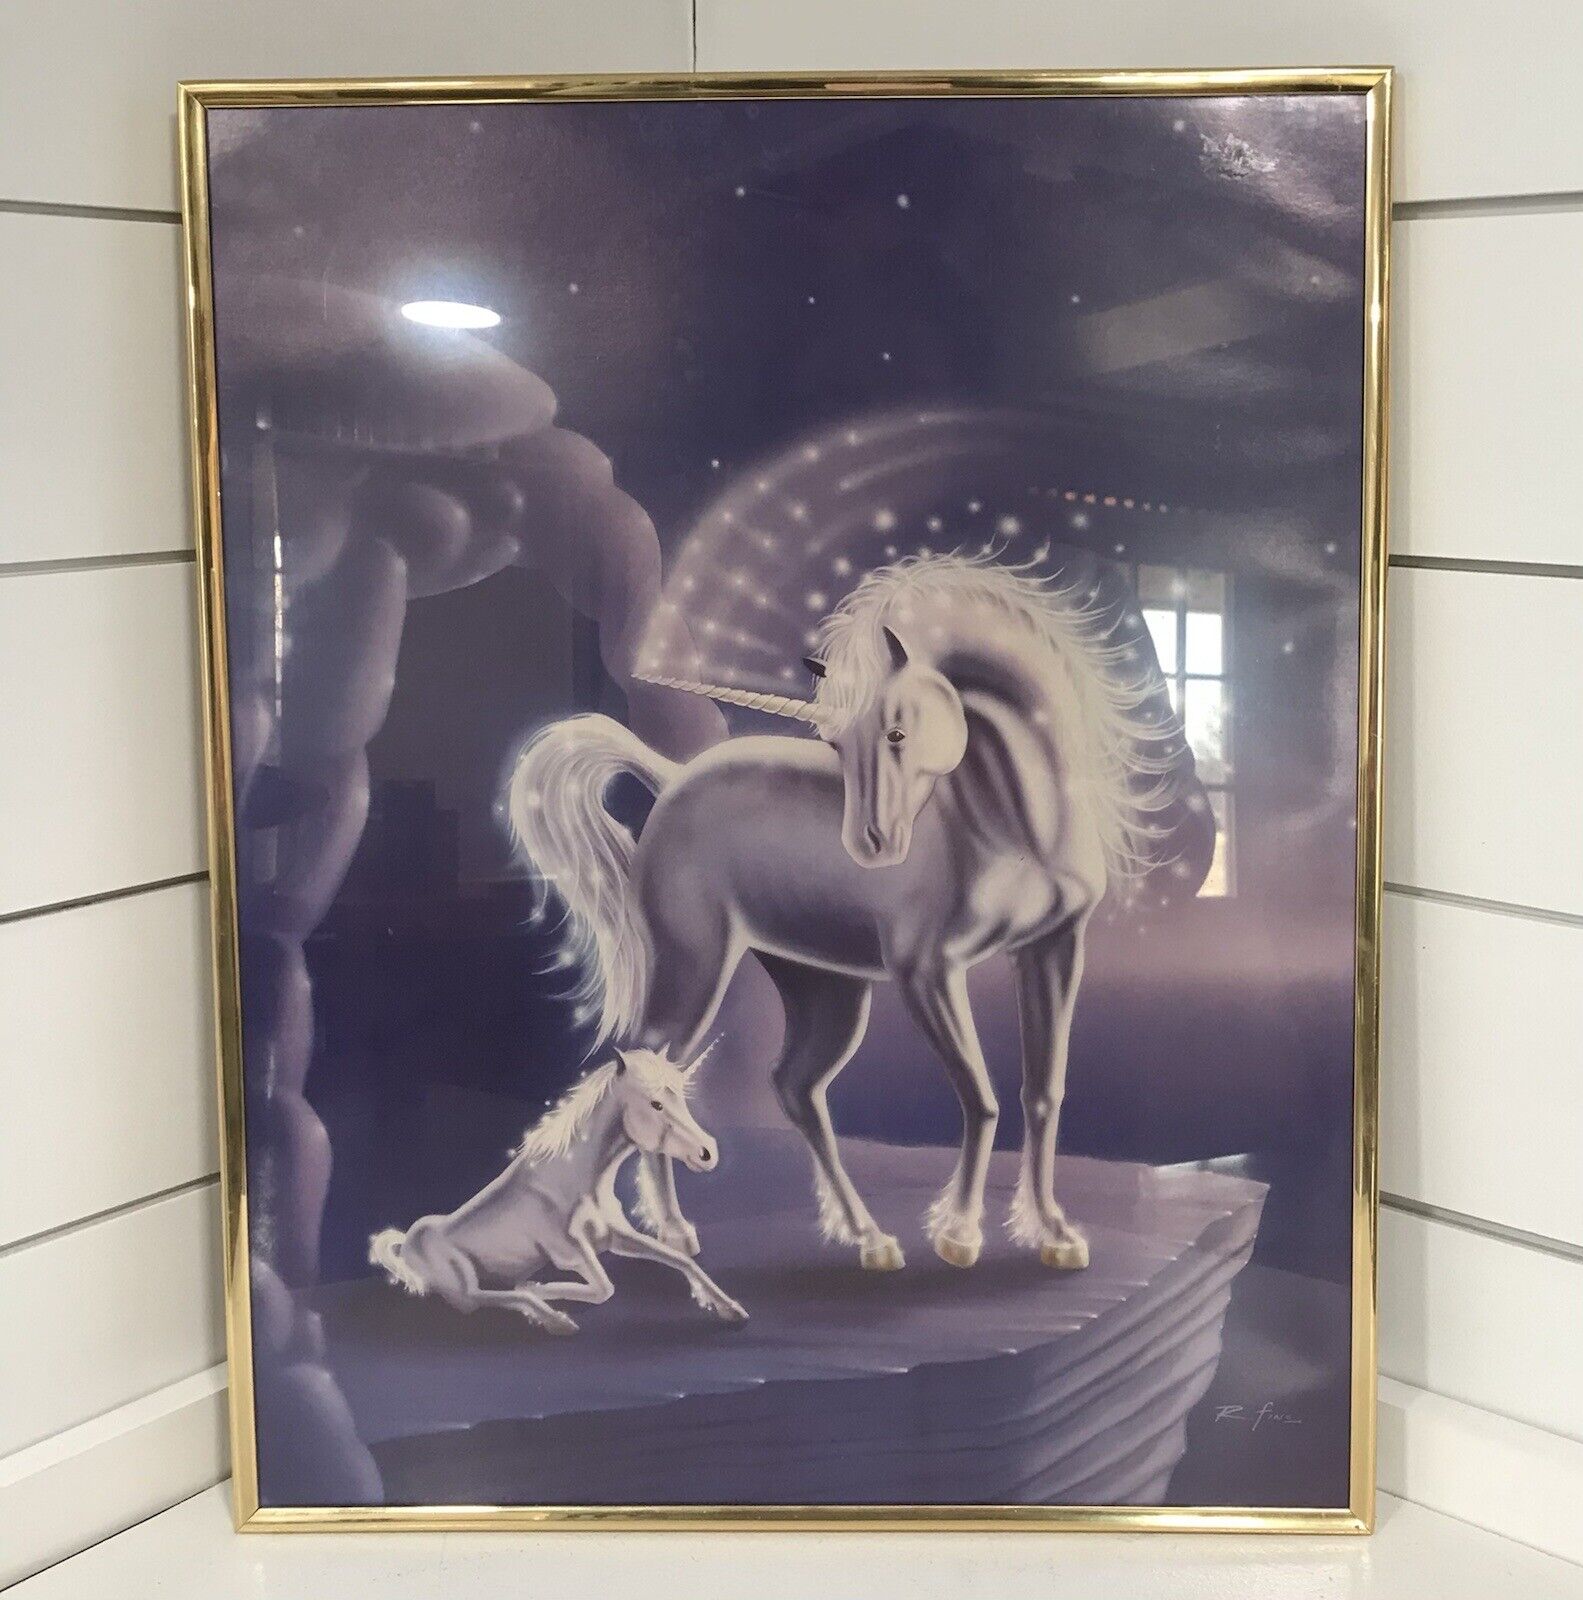 Vtg Unicorn Picture And Baby Saint Chateaux galleries 1985 16”x20”80’s Magic